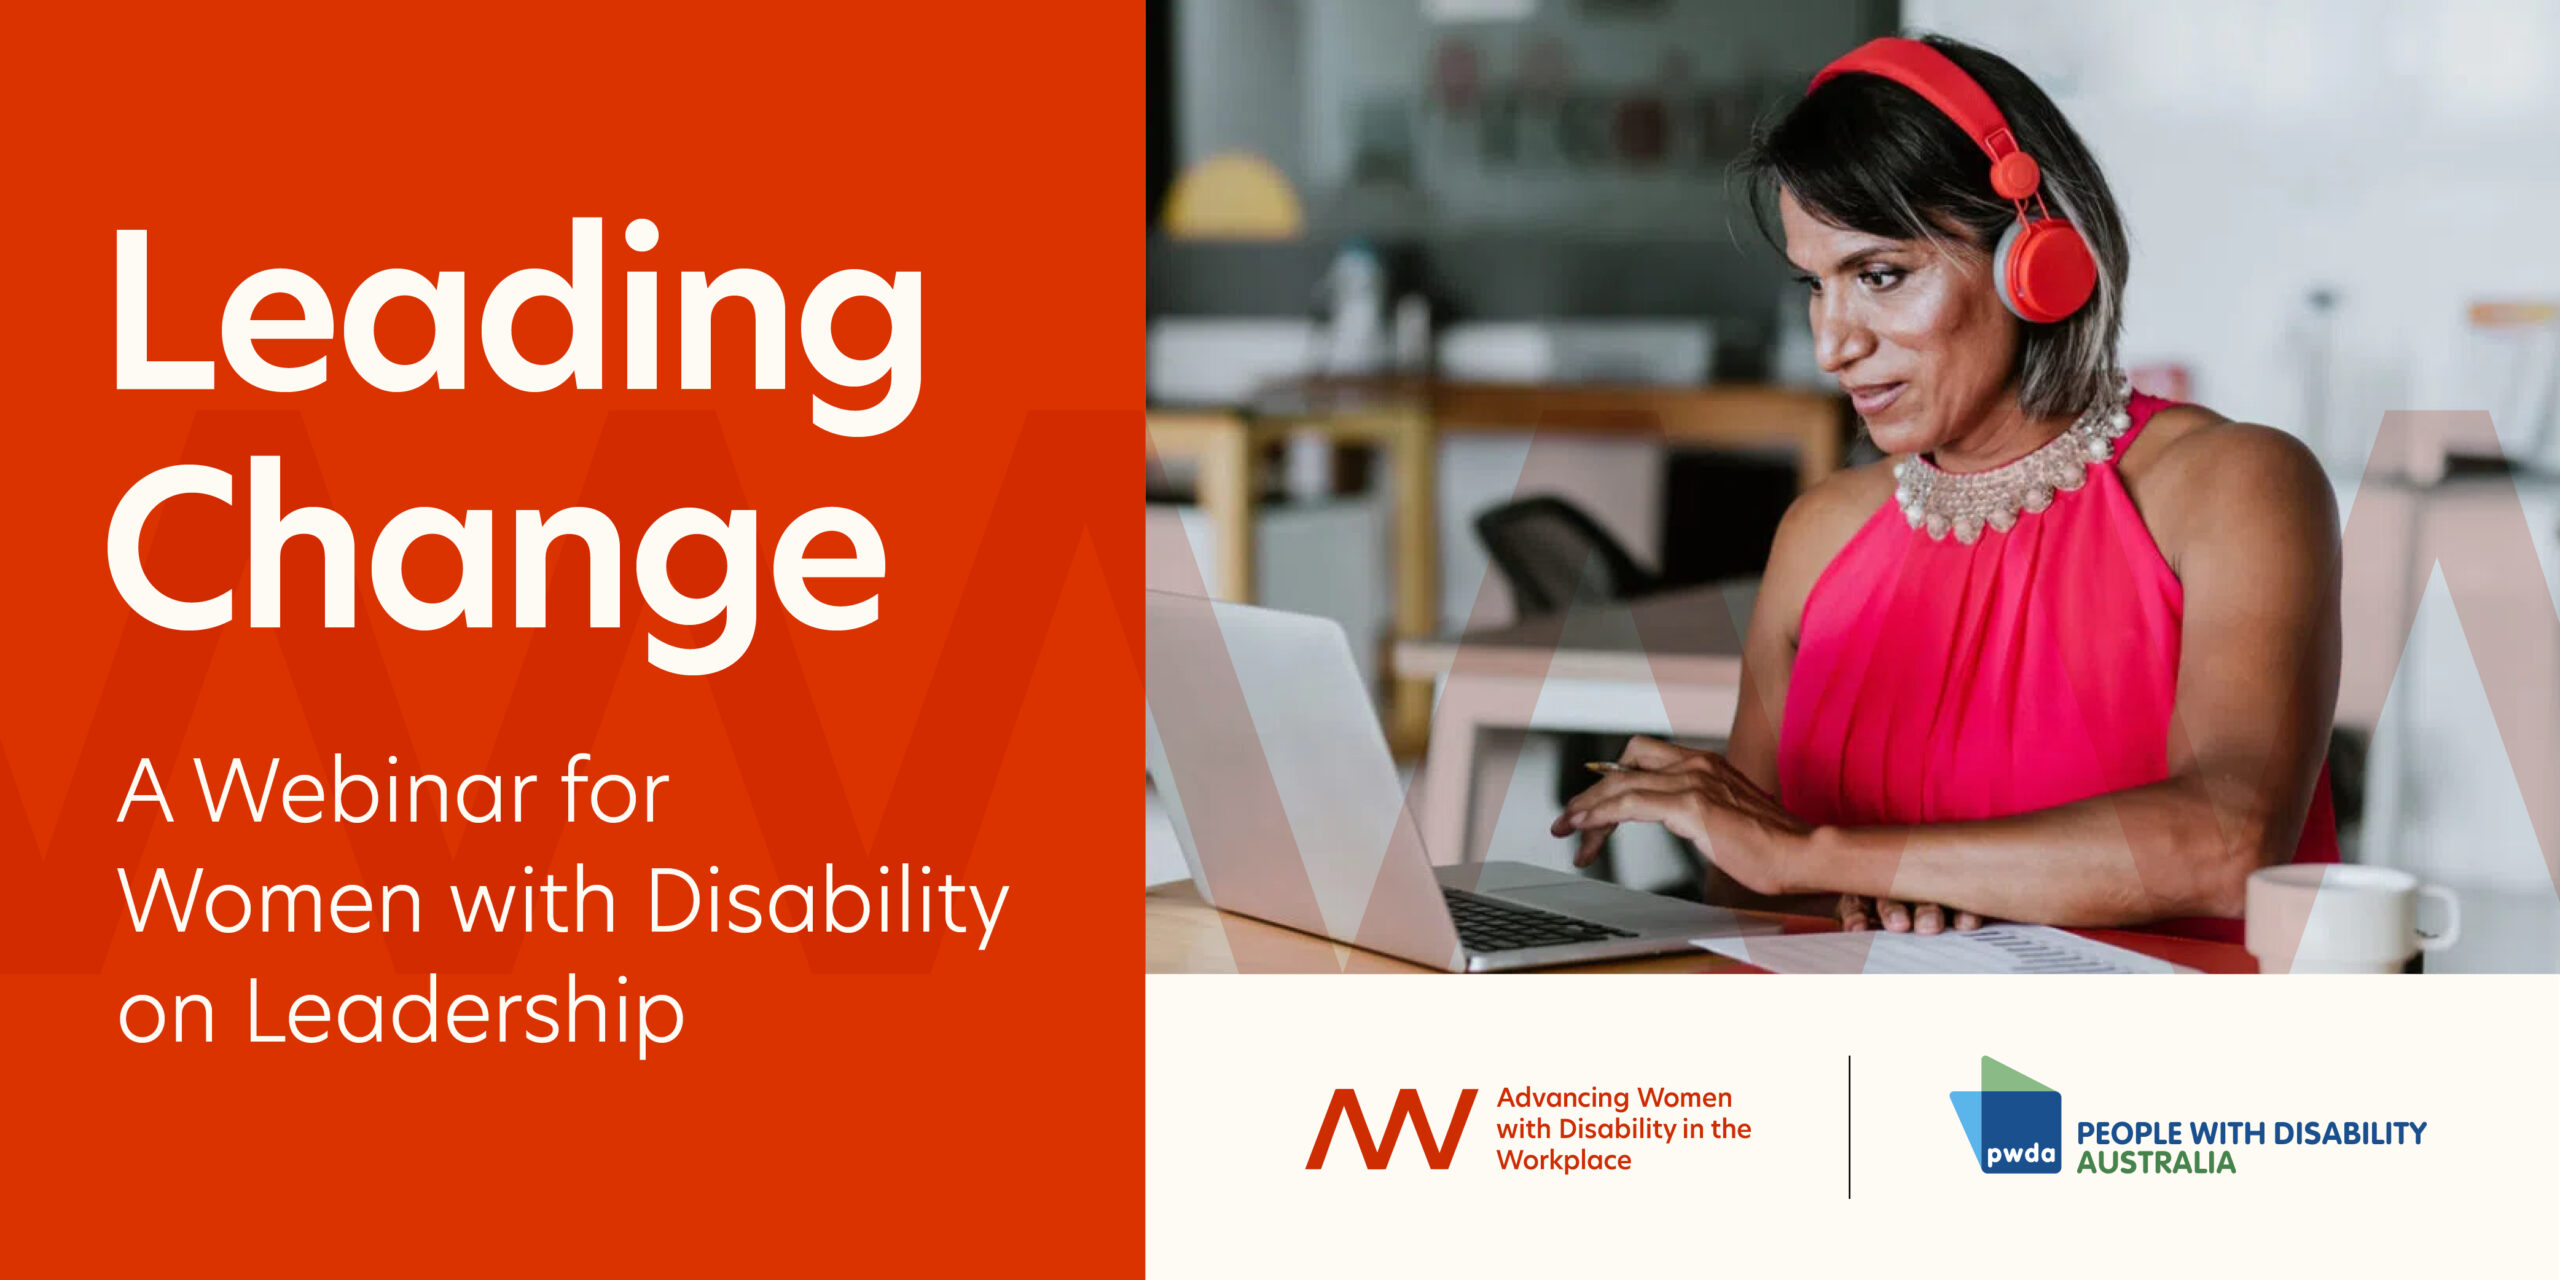 An advertisement for Leading Change – A Webinar for Women with Disability on Leadership featuring an image of a woman sitting at a computer.